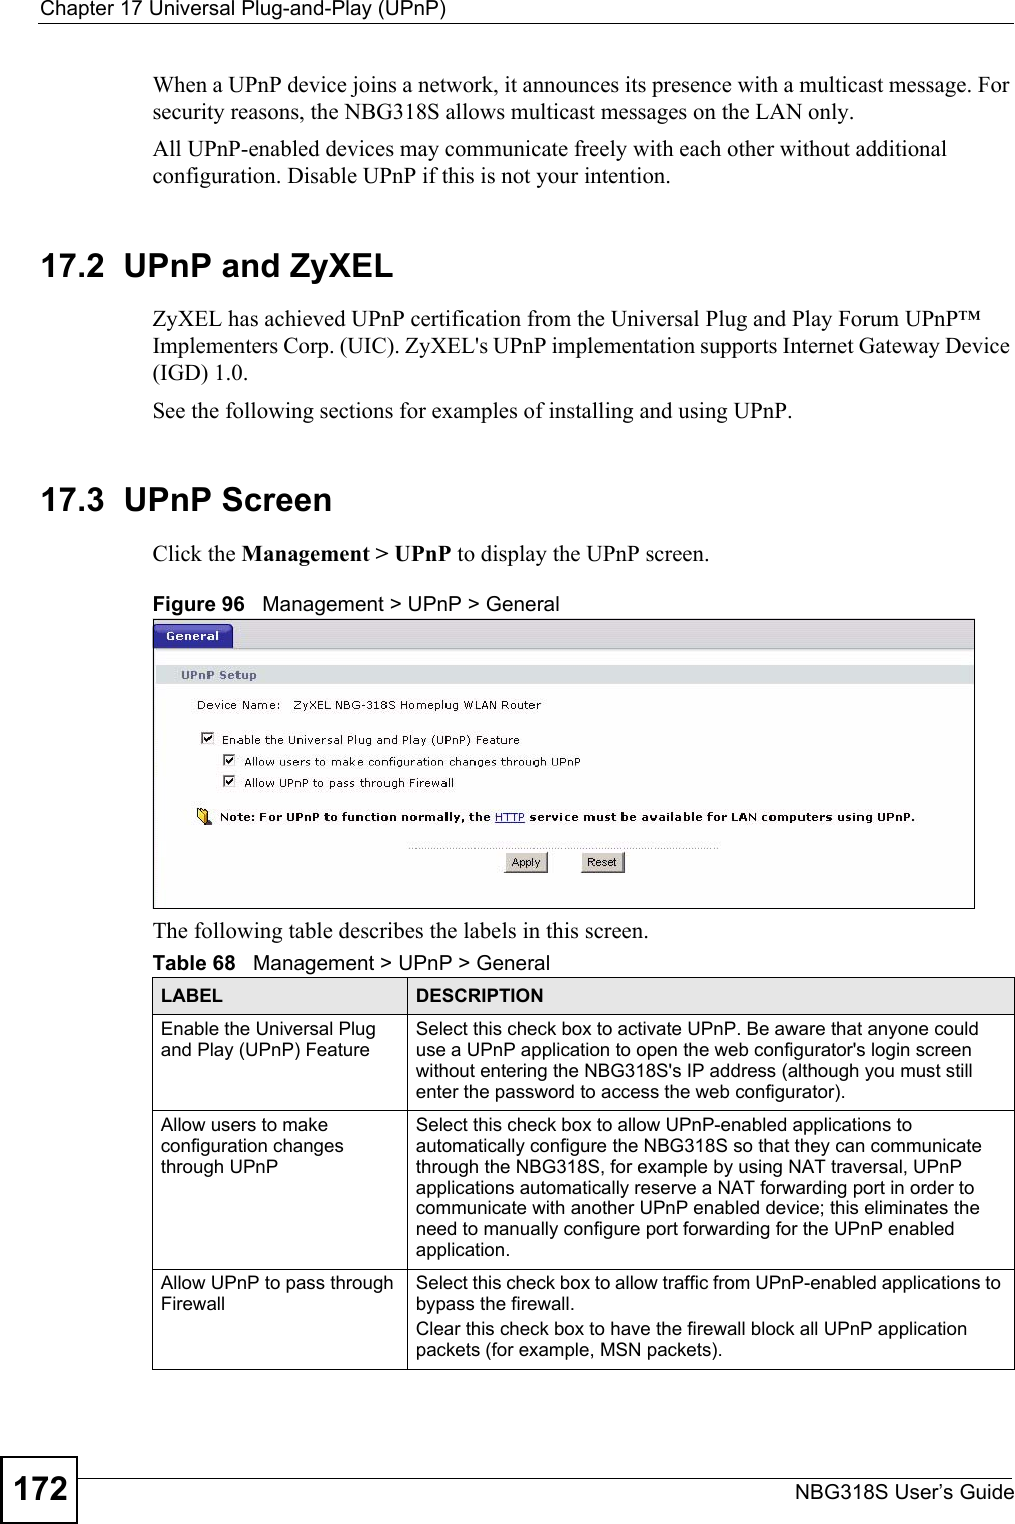 Chapter 17 Universal Plug-and-Play (UPnP)NBG318S User’s Guide172When a UPnP device joins a network, it announces its presence with a multicast message. For security reasons, the NBG318S allows multicast messages on the LAN only.All UPnP-enabled devices may communicate freely with each other without additional configuration. Disable UPnP if this is not your intention. 17.2  UPnP and ZyXELZyXEL has achieved UPnP certification from the Universal Plug and Play Forum UPnP™ Implementers Corp. (UIC). ZyXEL&apos;s UPnP implementation supports Internet Gateway Device (IGD) 1.0. See the following sections for examples of installing and using UPnP.17.3  UPnP ScreenClick the Management &gt; UPnP to display the UPnP screen.Figure 96   Management &gt; UPnP &gt; General The following table describes the labels in this screen. Table 68   Management &gt; UPnP &gt; GeneralLABEL DESCRIPTIONEnable the Universal Plug and Play (UPnP) FeatureSelect this check box to activate UPnP. Be aware that anyone could use a UPnP application to open the web configurator&apos;s login screen without entering the NBG318S&apos;s IP address (although you must still enter the password to access the web configurator).Allow users to make configuration changes through UPnPSelect this check box to allow UPnP-enabled applications to automatically configure the NBG318S so that they can communicate through the NBG318S, for example by using NAT traversal, UPnP applications automatically reserve a NAT forwarding port in order to communicate with another UPnP enabled device; this eliminates the need to manually configure port forwarding for the UPnP enabled application. Allow UPnP to pass through FirewallSelect this check box to allow traffic from UPnP-enabled applications to bypass the firewall. Clear this check box to have the firewall block all UPnP application packets (for example, MSN packets).